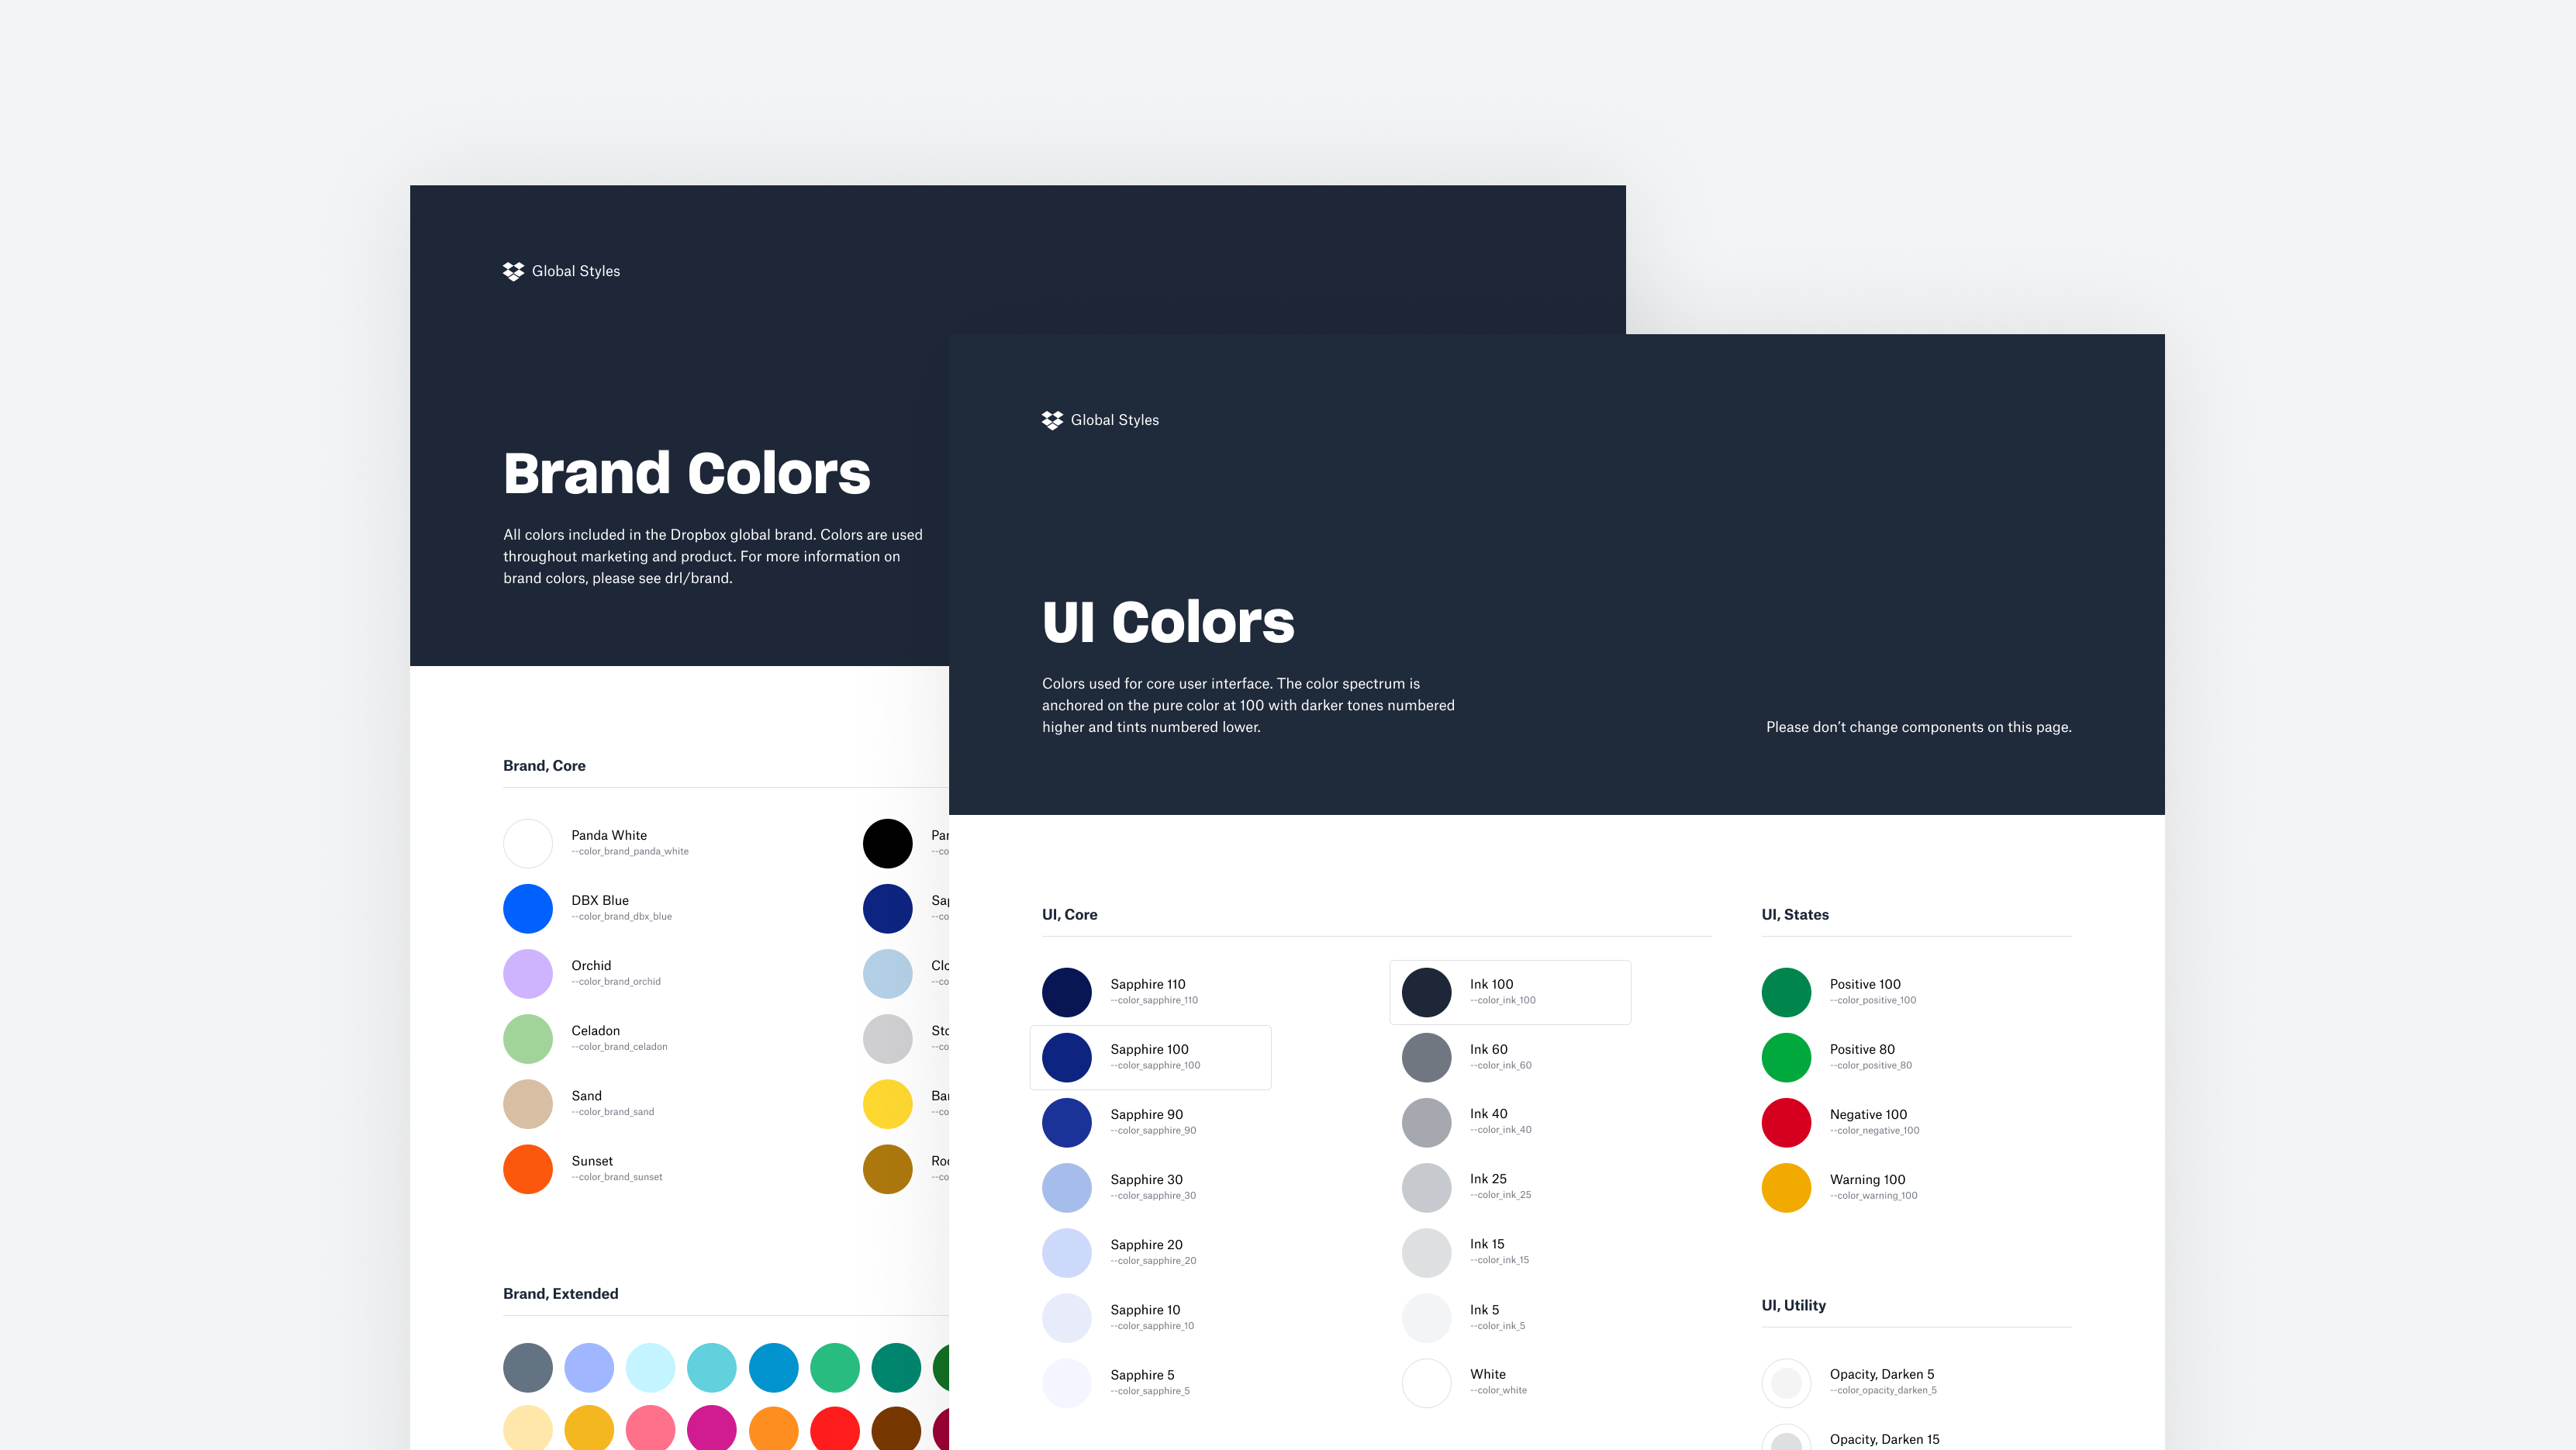 Colors in the Global Styles library.